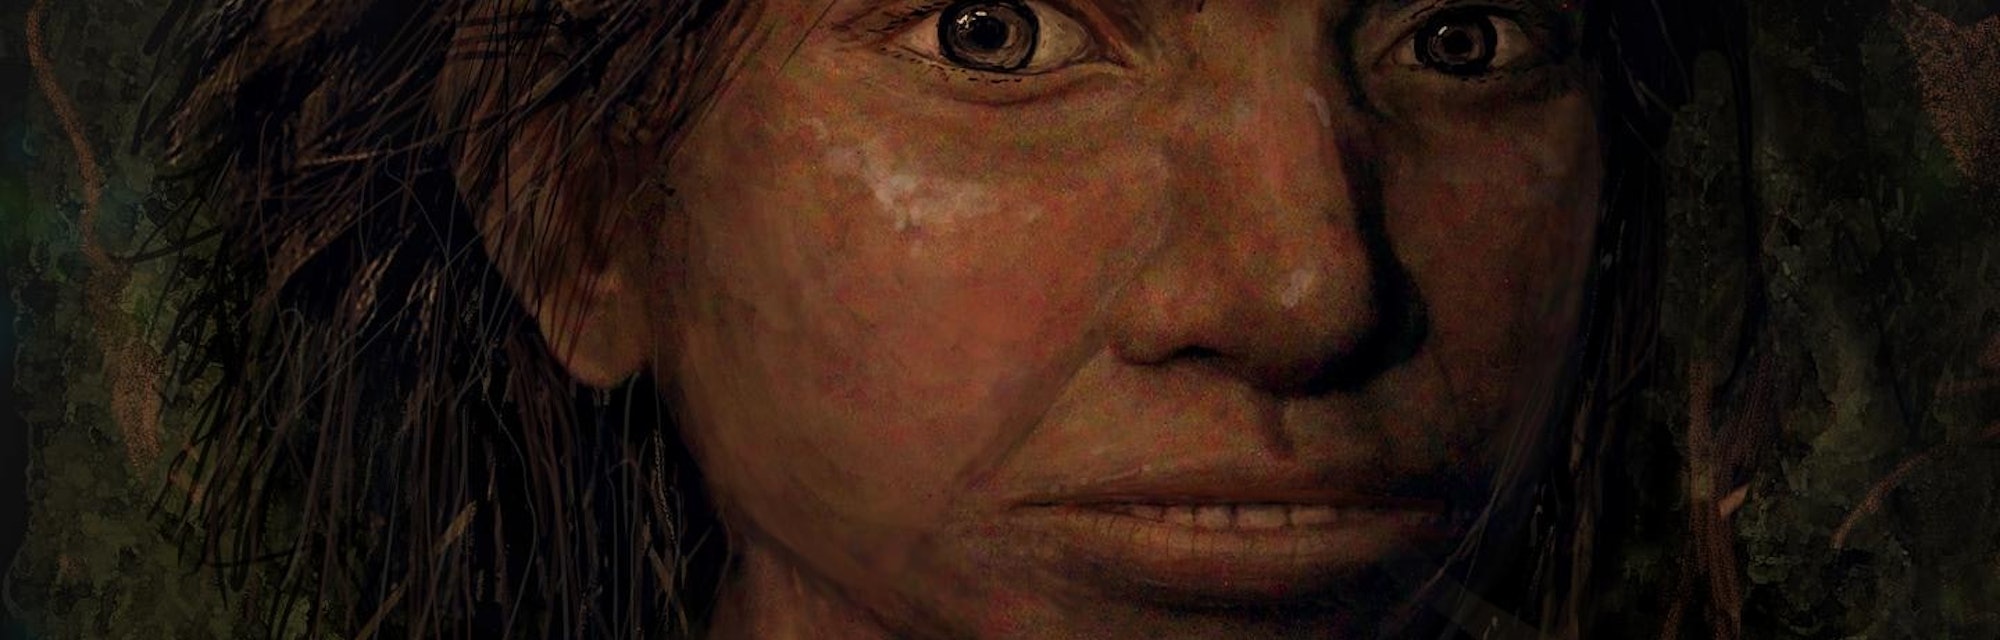 This image shows a portrait of a juvenile female Denisovan based on a skeletal profile reconstructed...